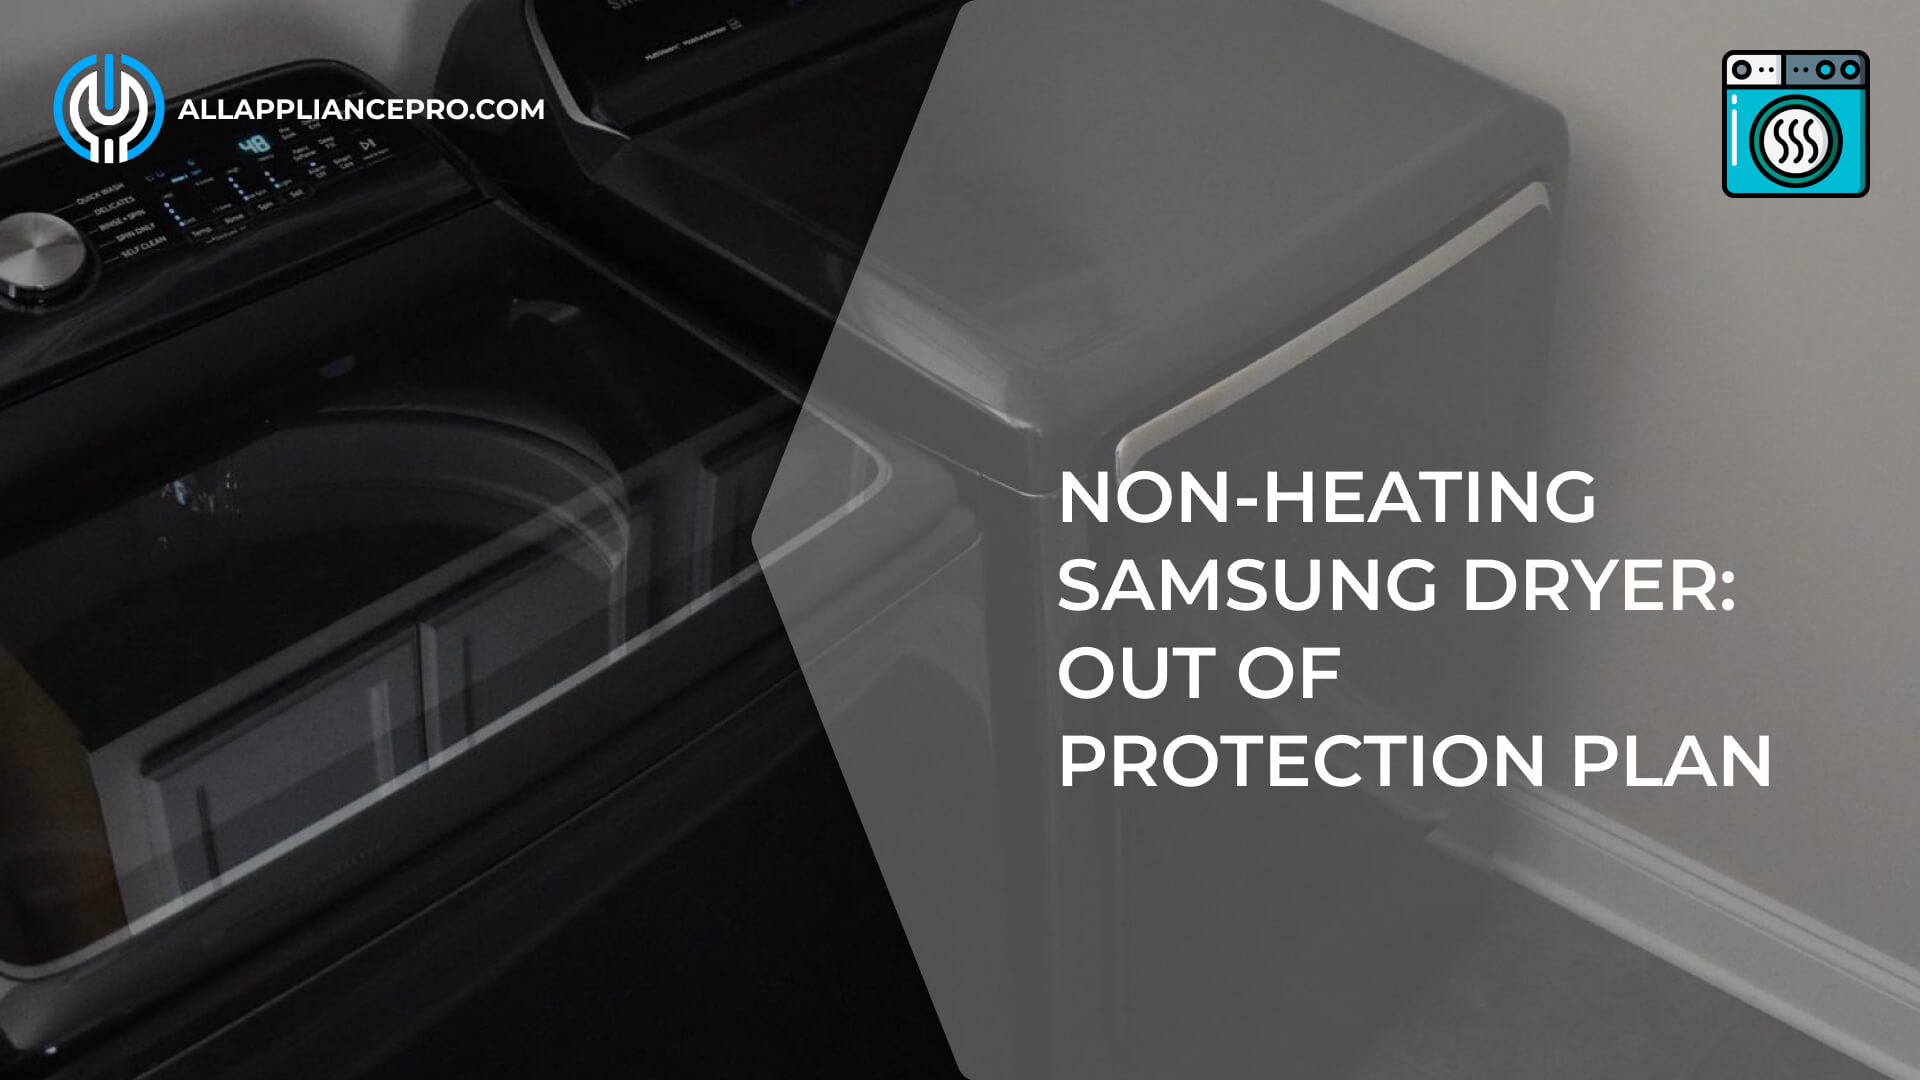 Non-Heating Samsung Dryer: Out of Protection Plan